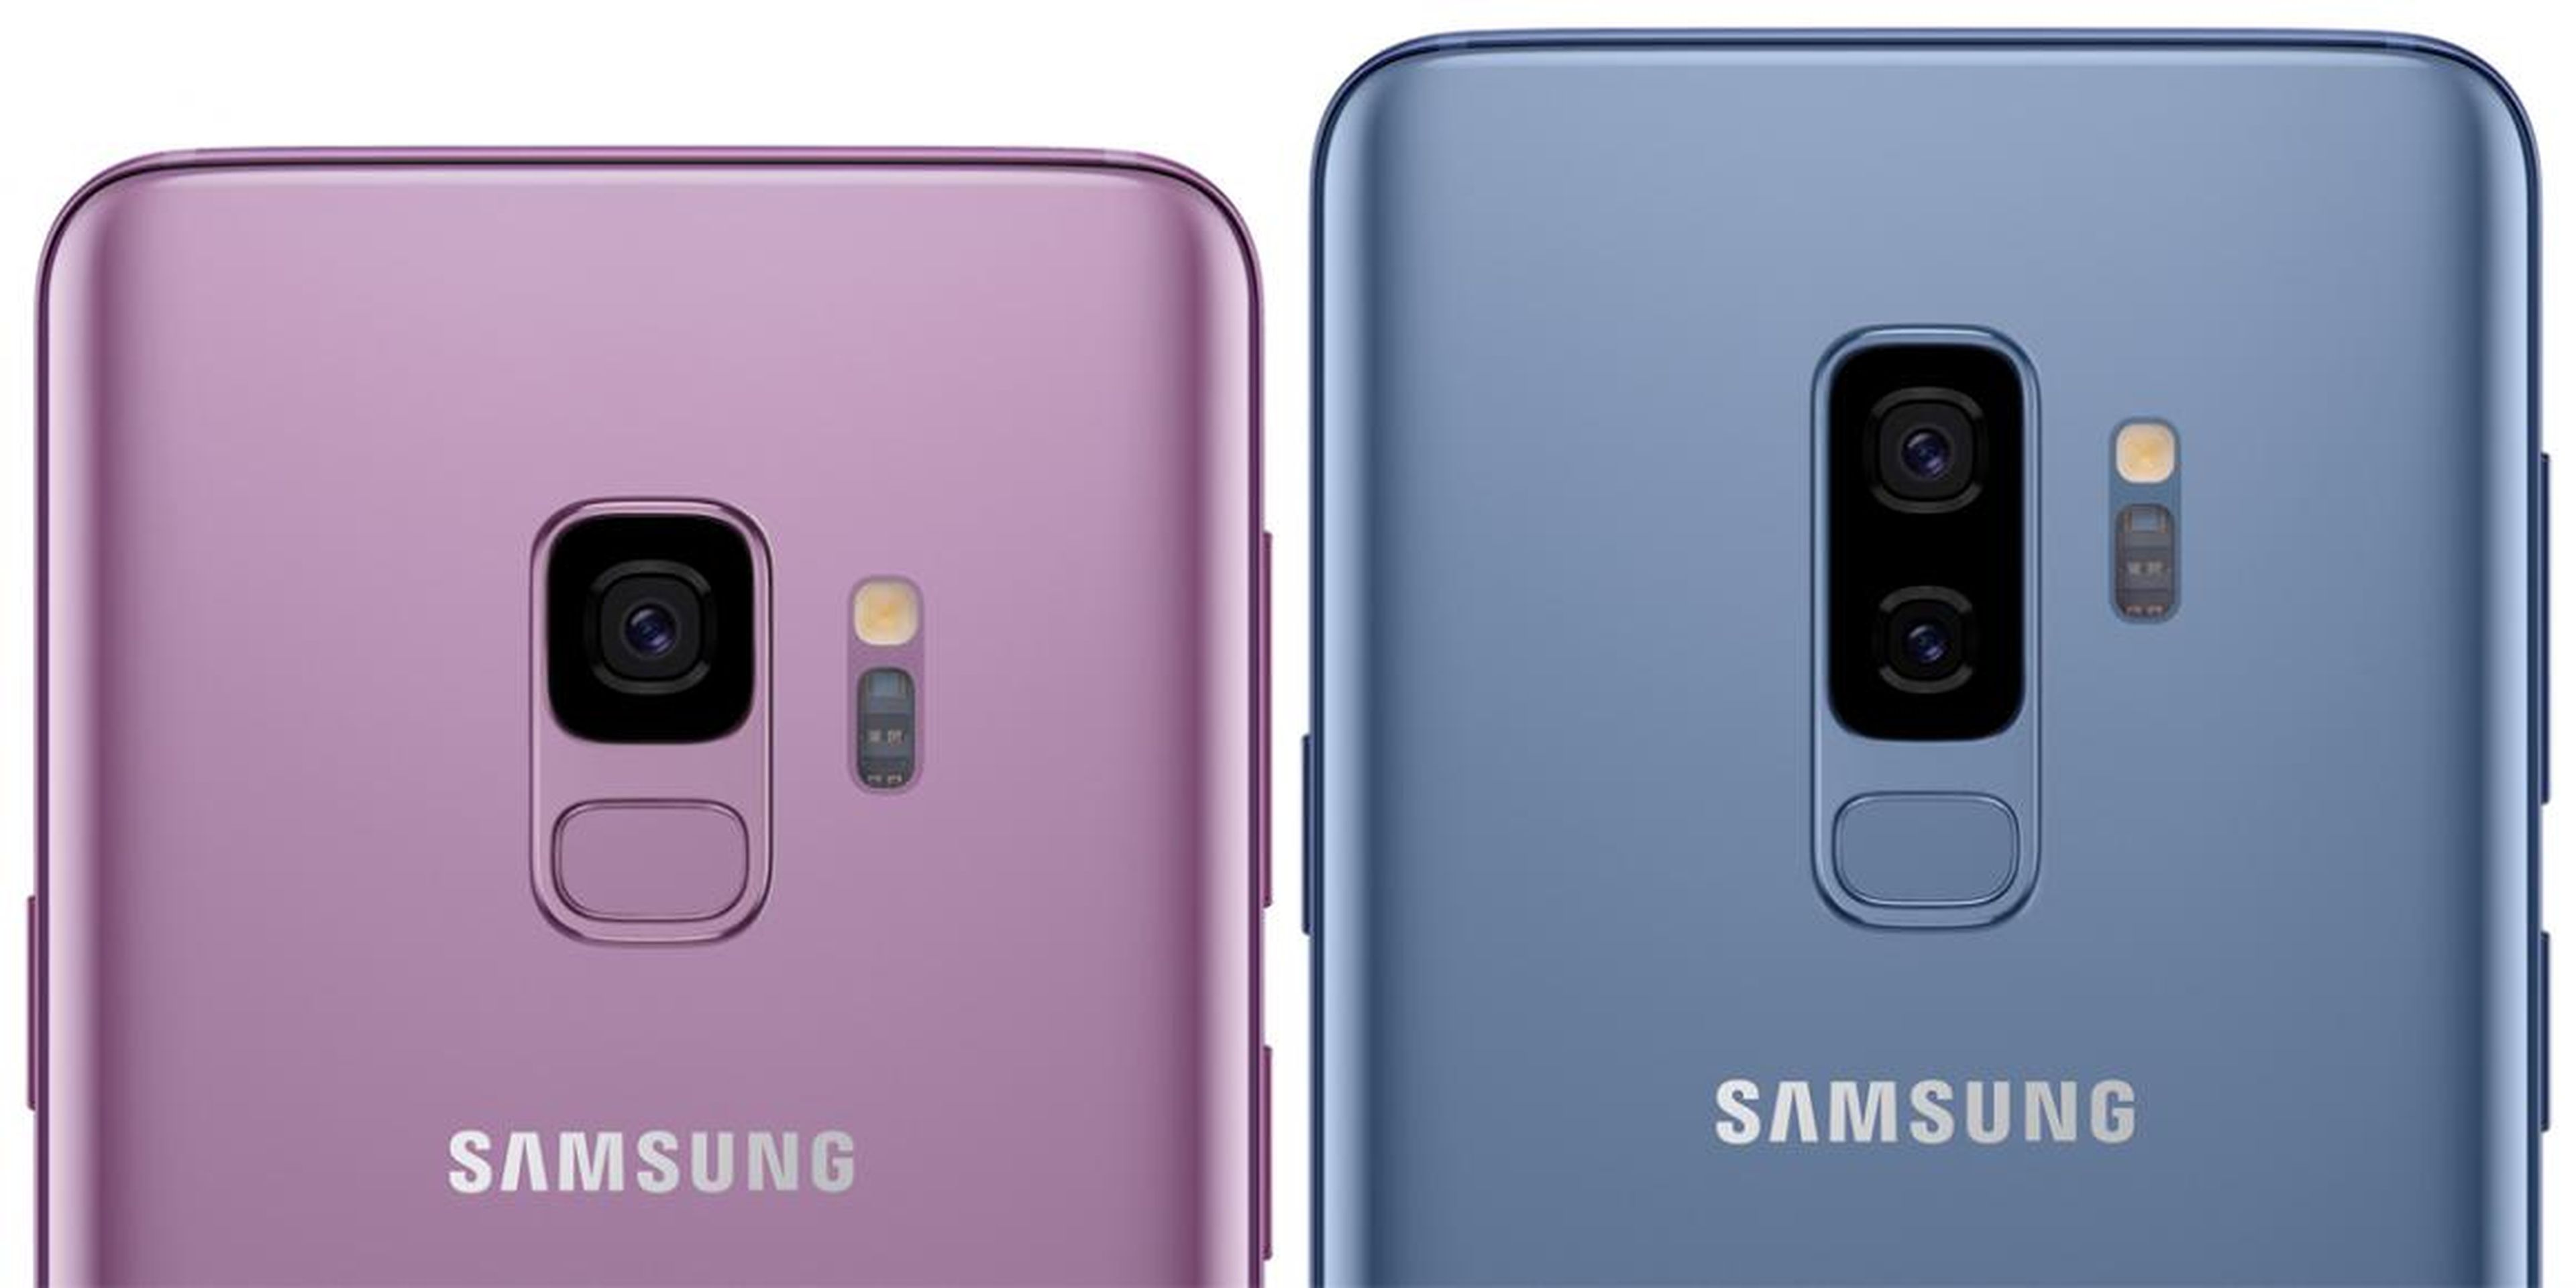 The Galaxy S9 has a leg up on the Galaxy Note 9 in a few ways. It comes in more colors and sizes ...